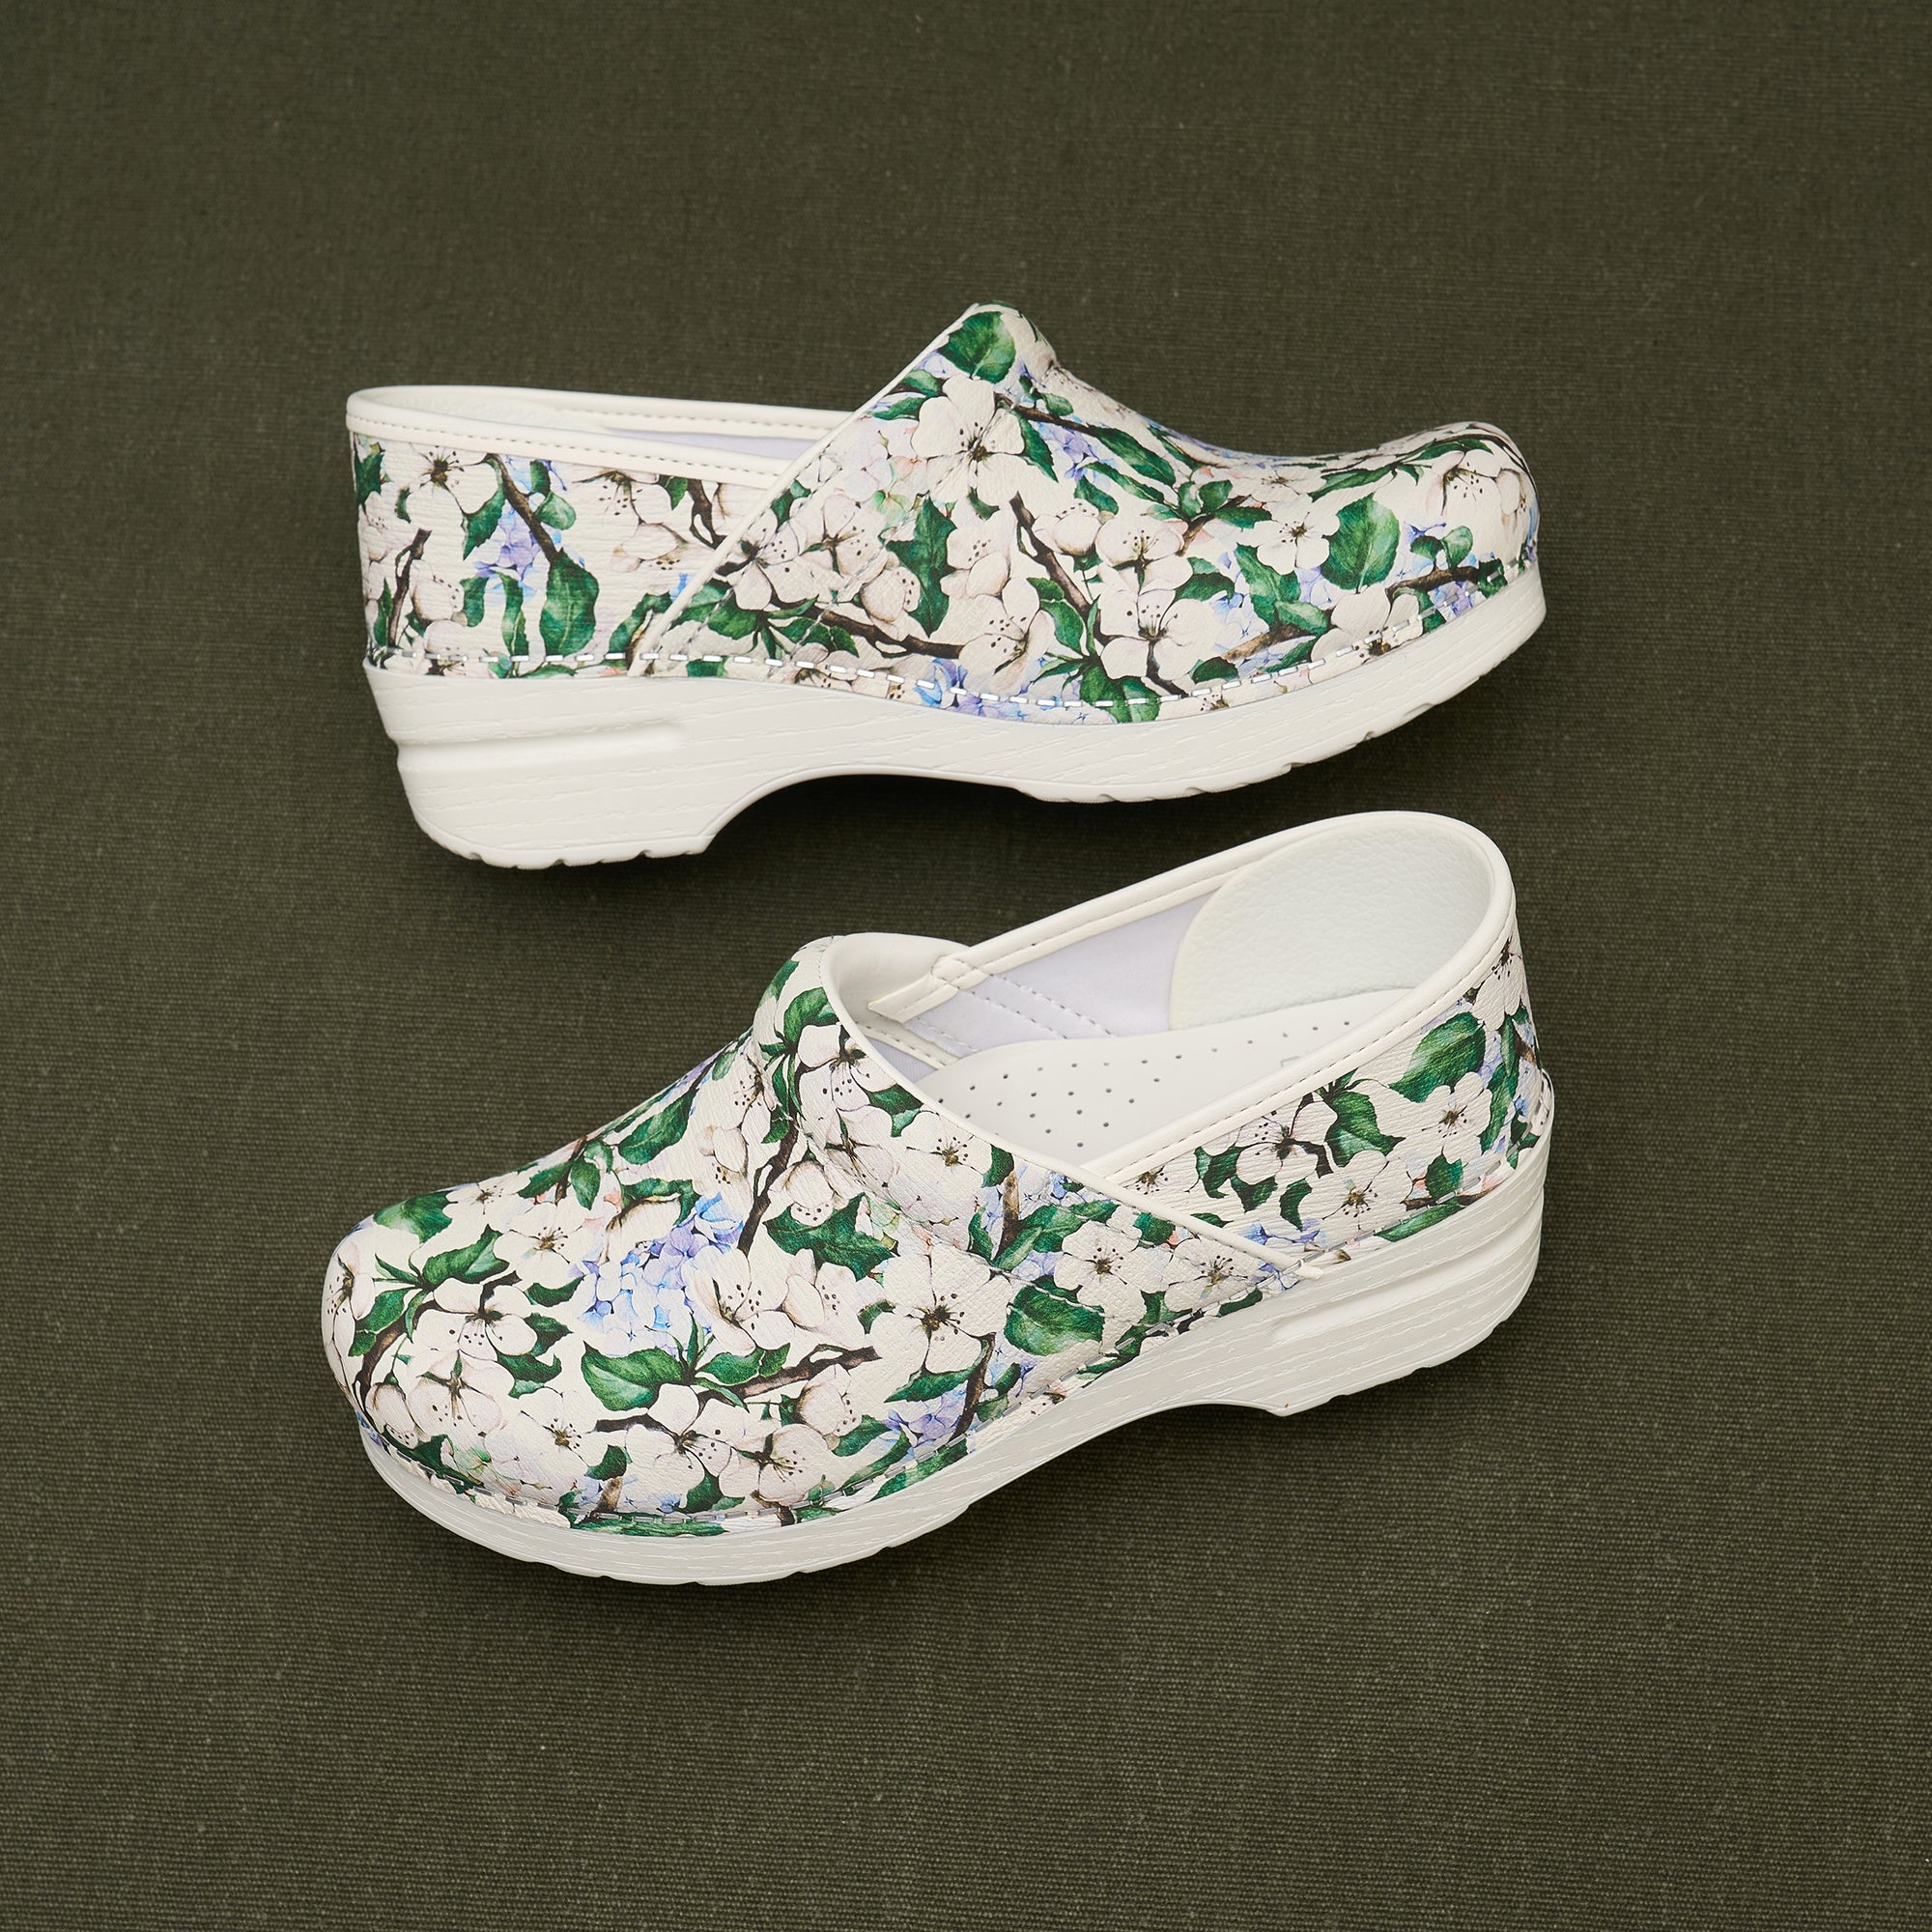 White-base clogs with a vine and flower pattern on leather uppers.